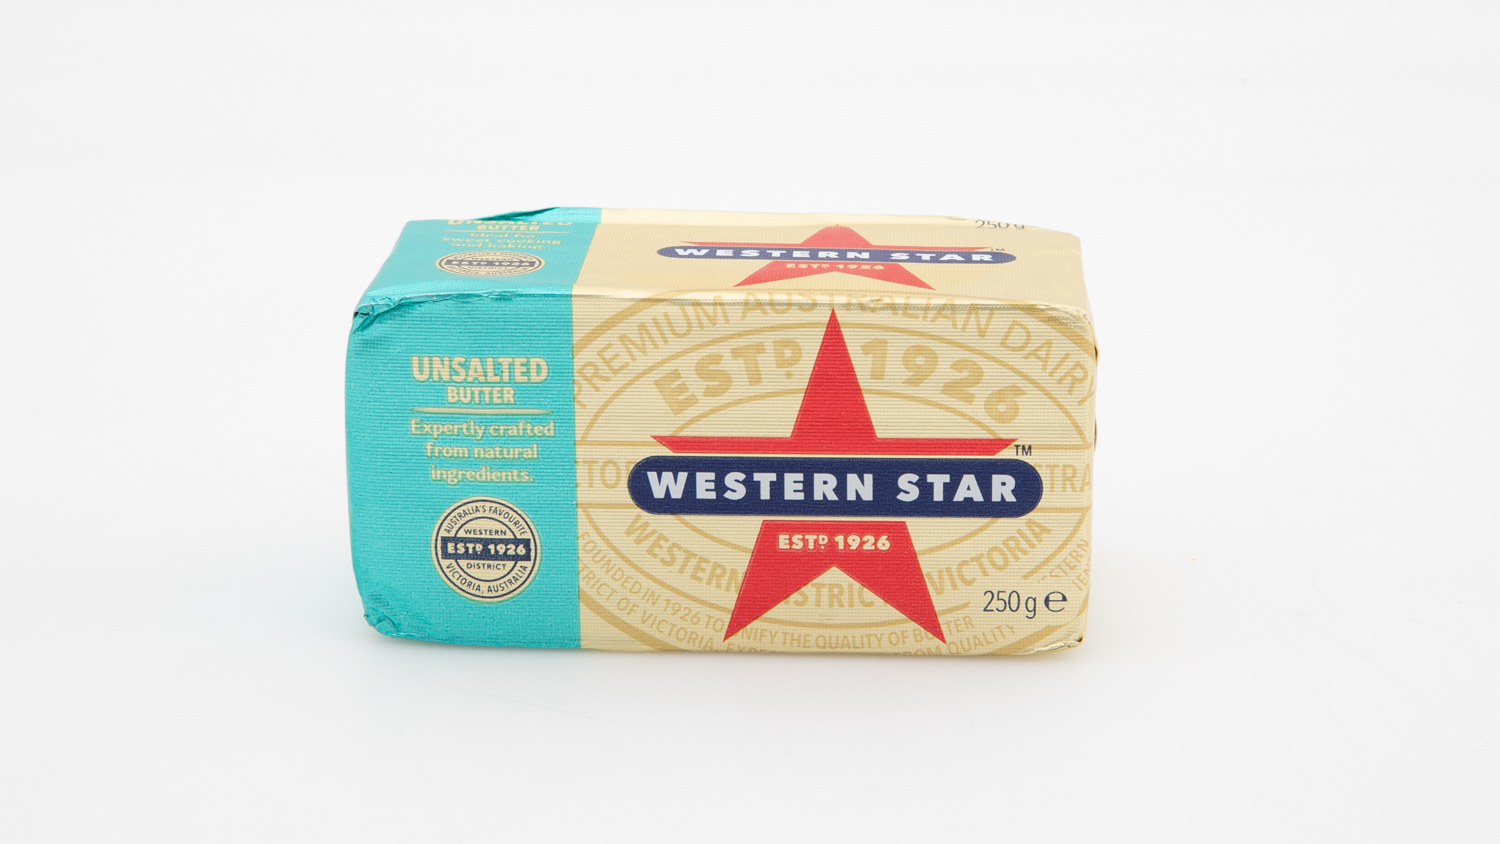 Western Star Unsalted Butter carousel image